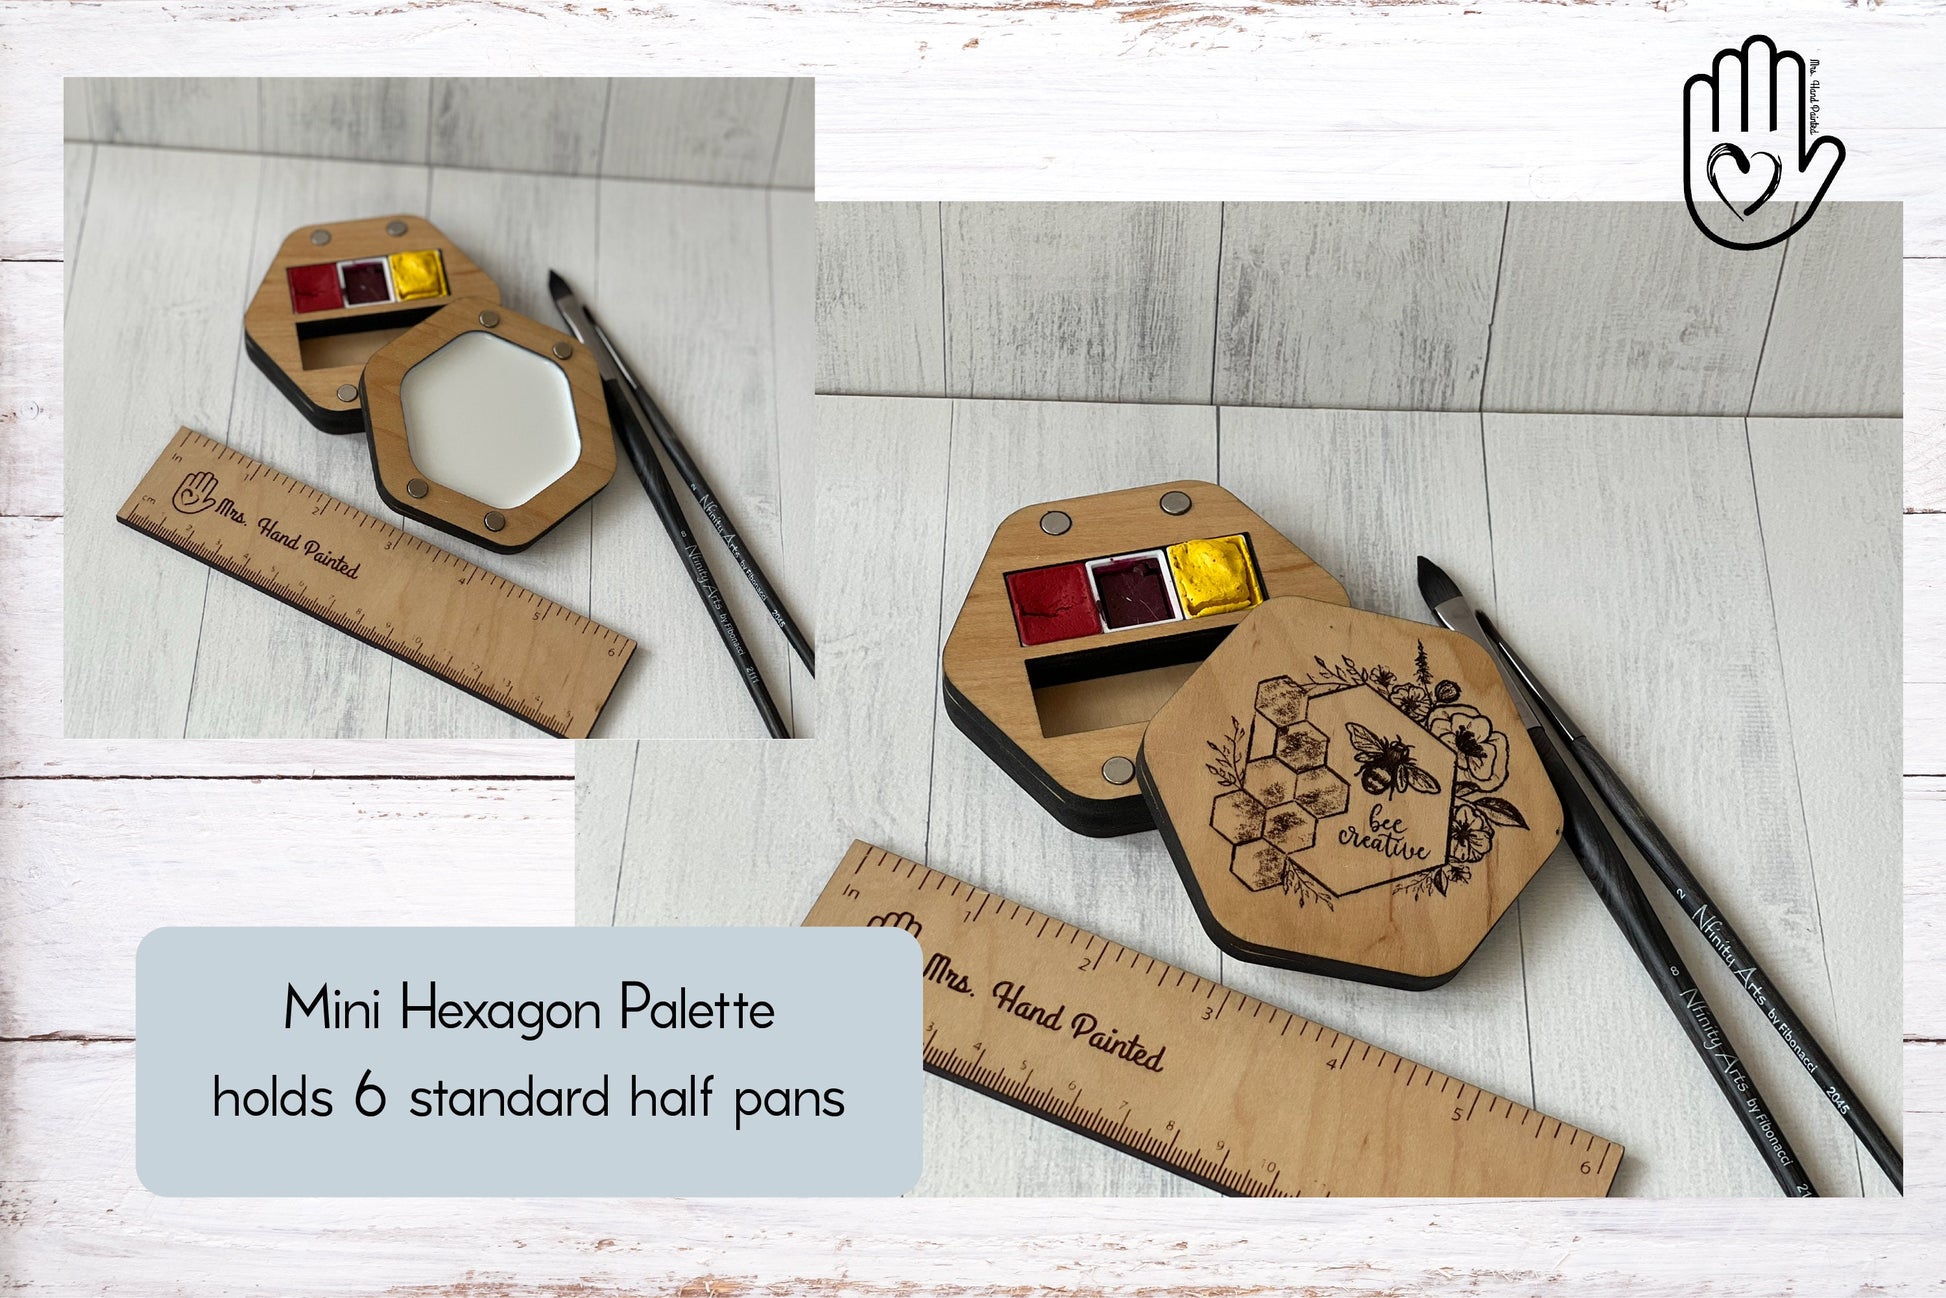 Mini Hexagon Wood Watercolor Palette - Custom Engraved with Hand Drawn Bee and Floral Design